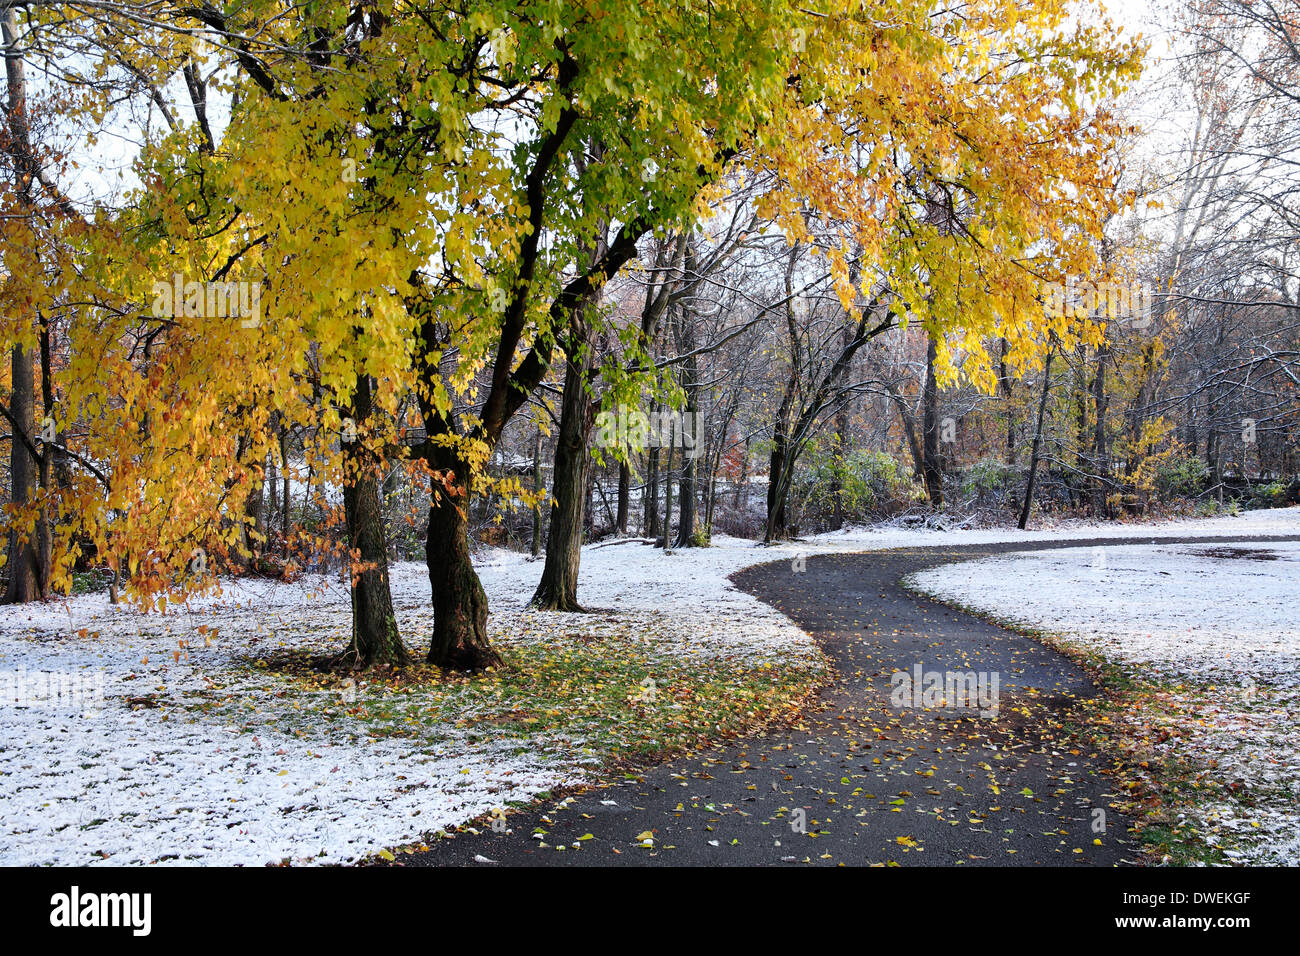 Unexpected Autumn Snow, Colorful Trees And Walking Path In The Park, Sharon Woods, Southwestern Ohio, USA Stock Photo